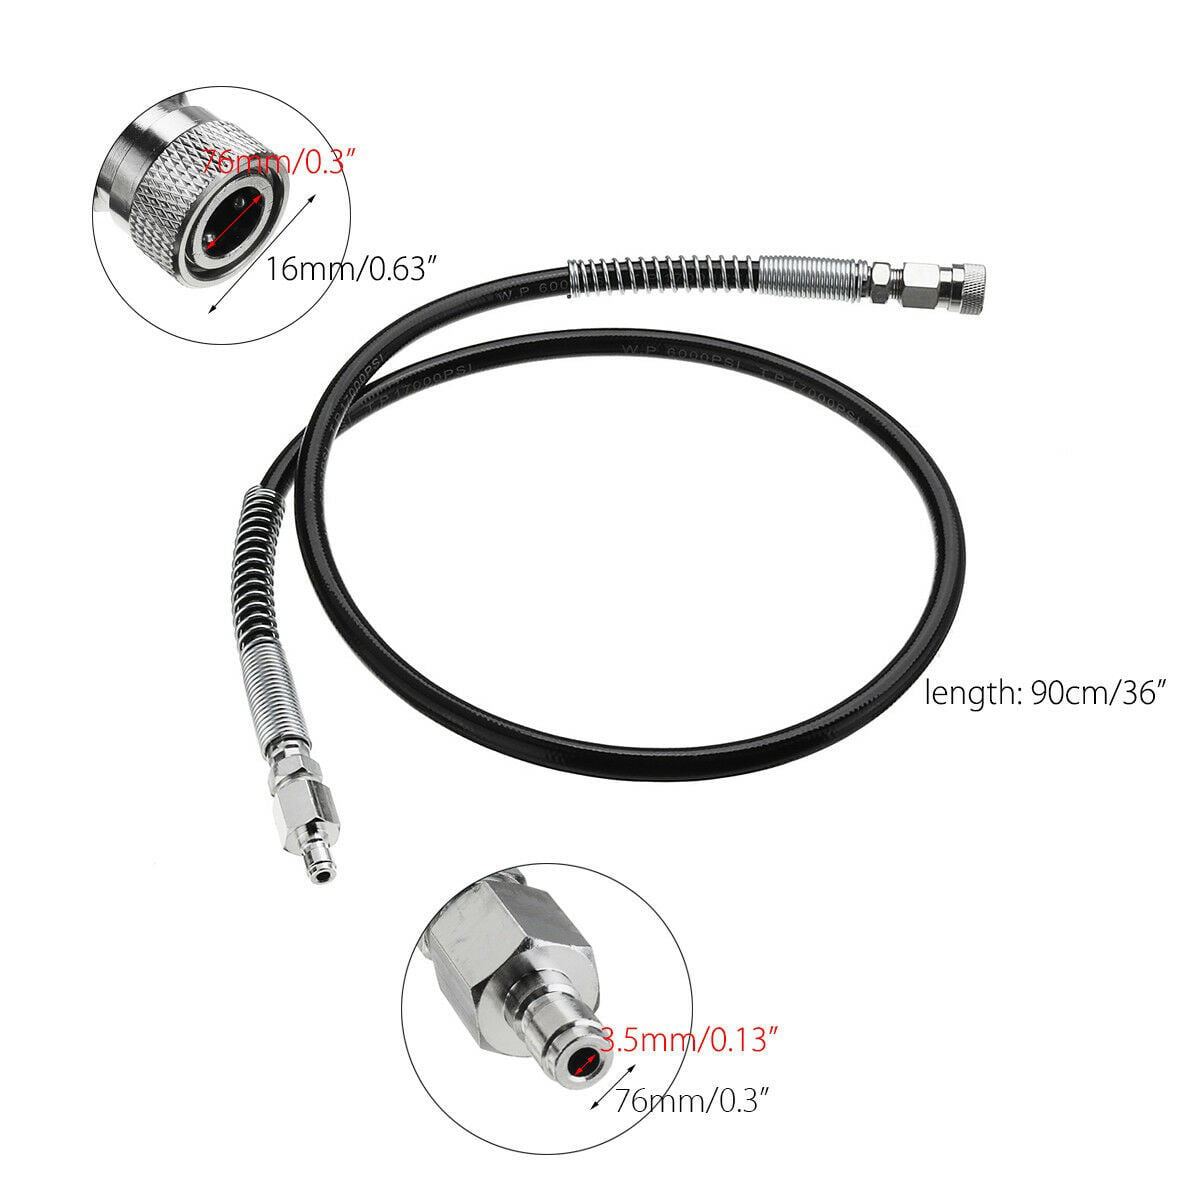 PCP Paintball Shooting Tank Fill Station Hose 4500psi 1/8" 90cm For Scuba Diving 